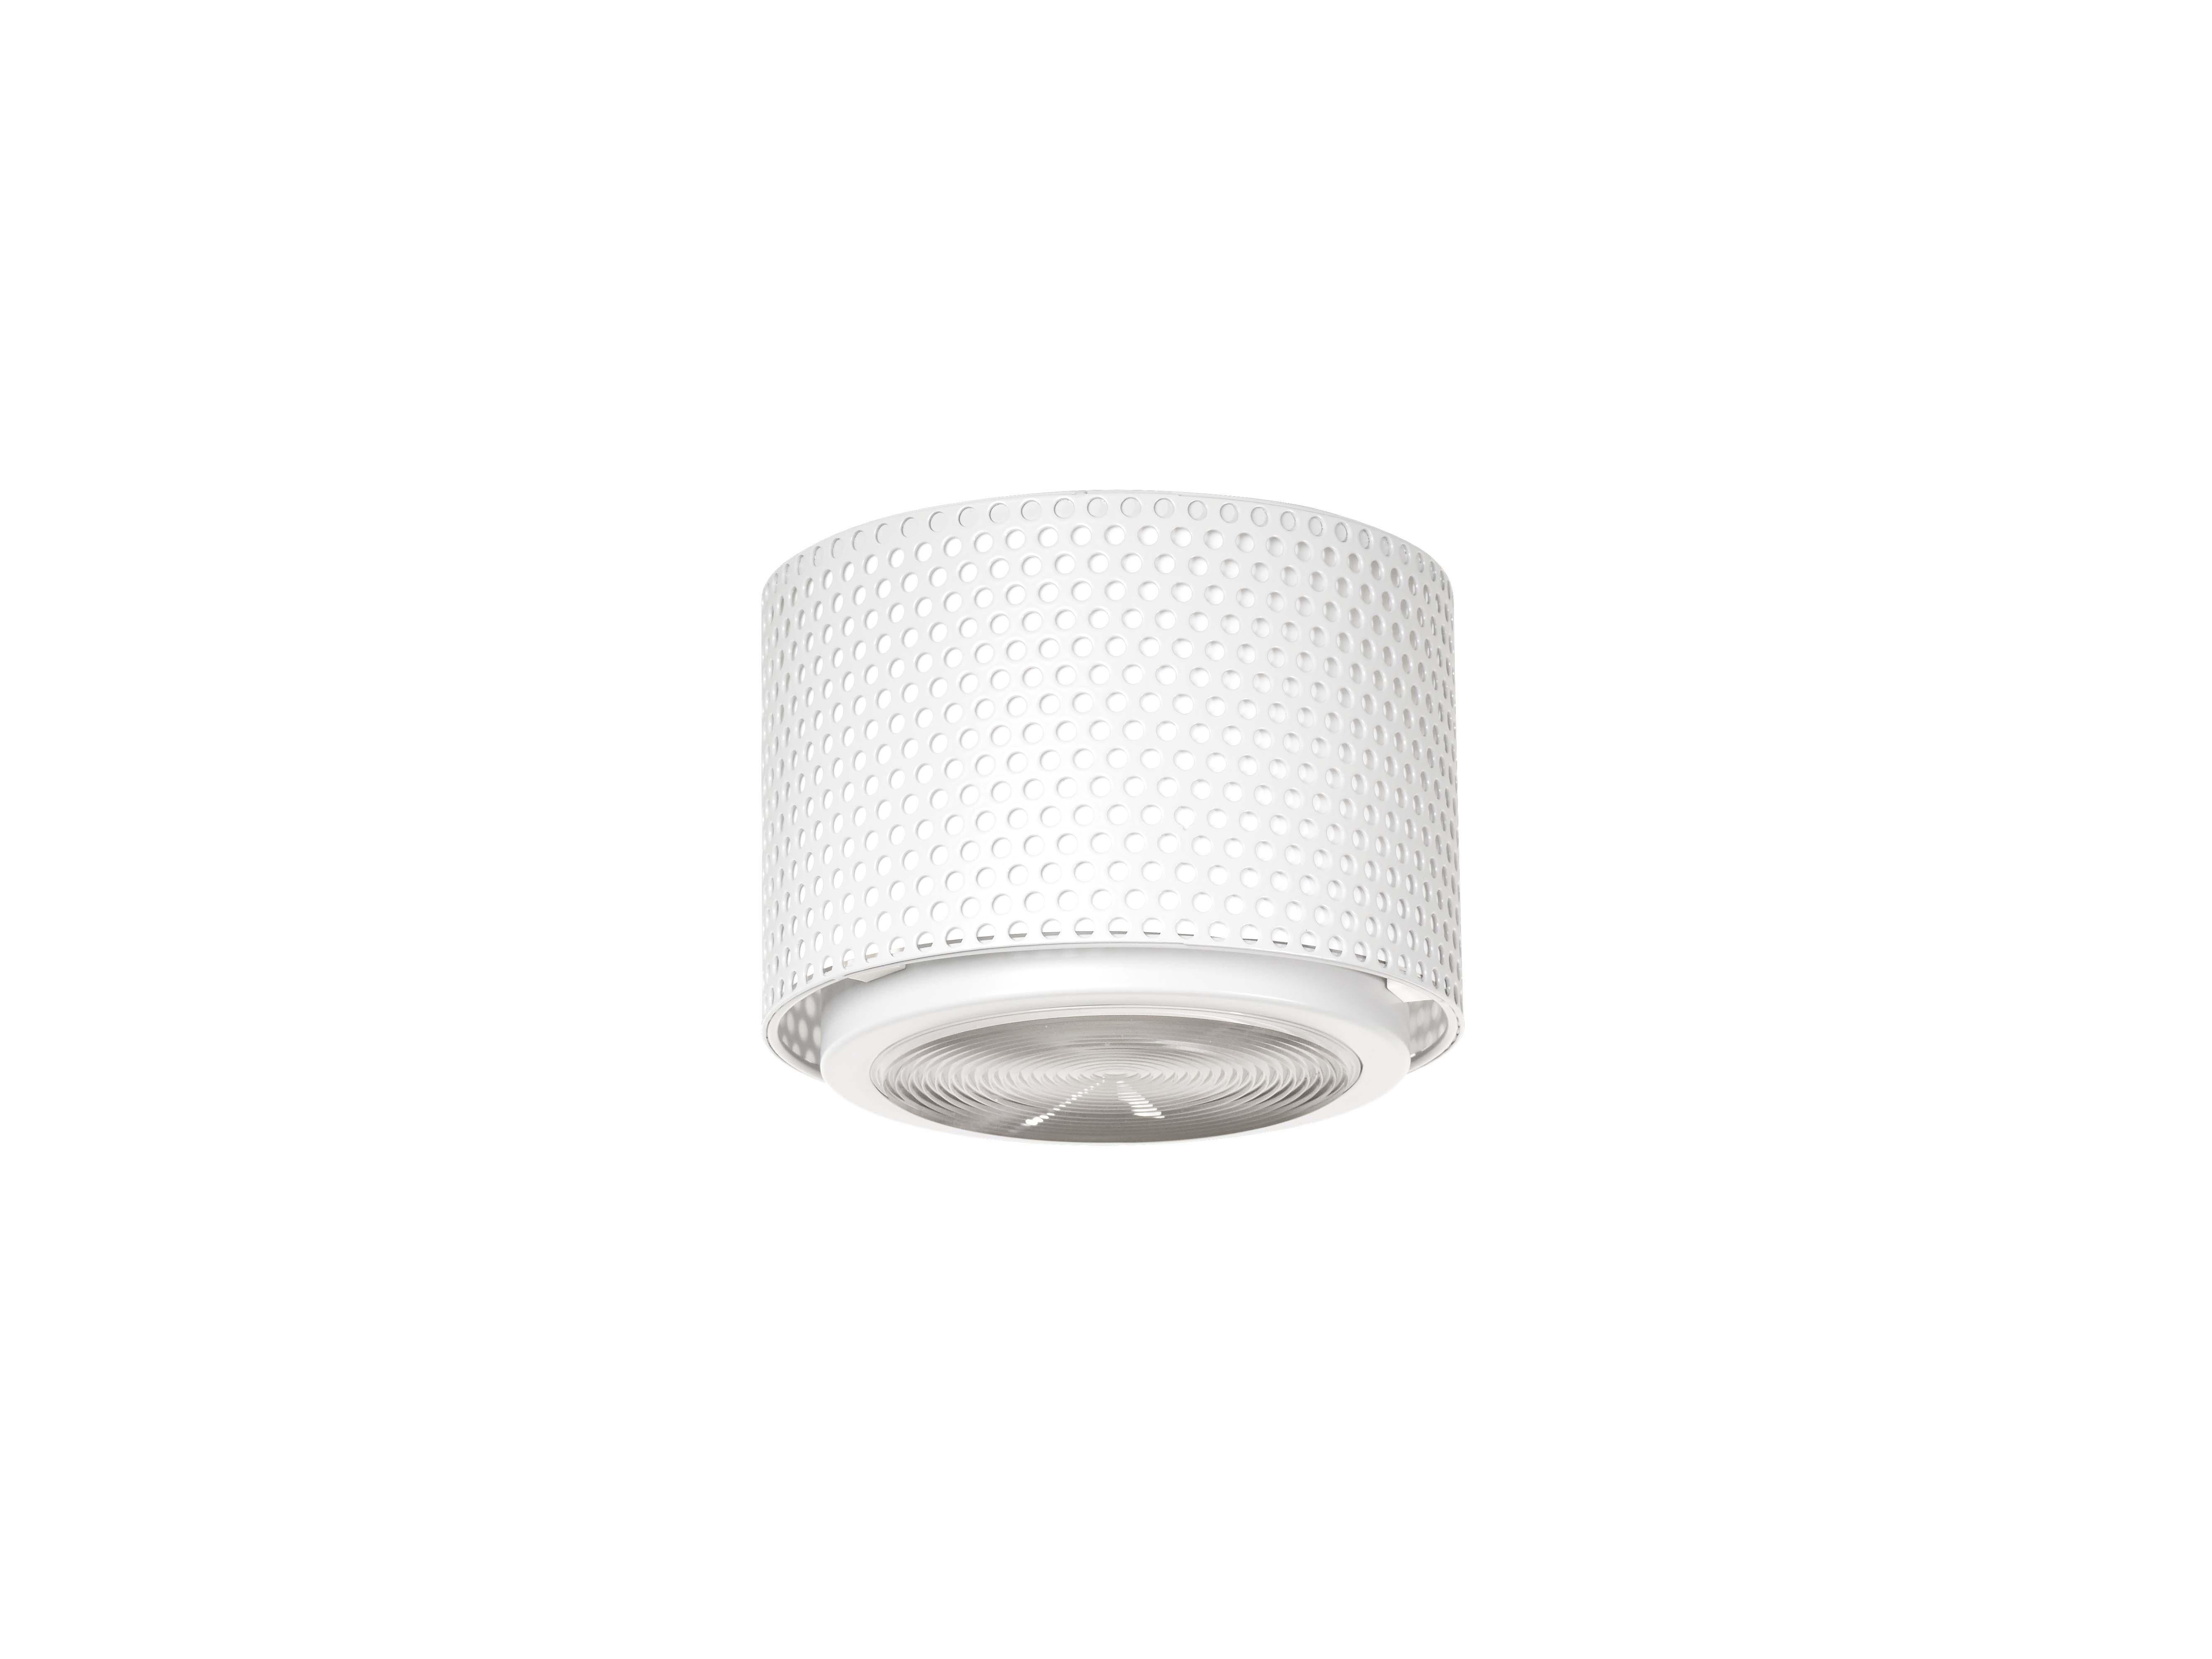 Small Pierre Guariche 'G13' Wall or Ceiling Light for Sammode Studio in White For Sale 5